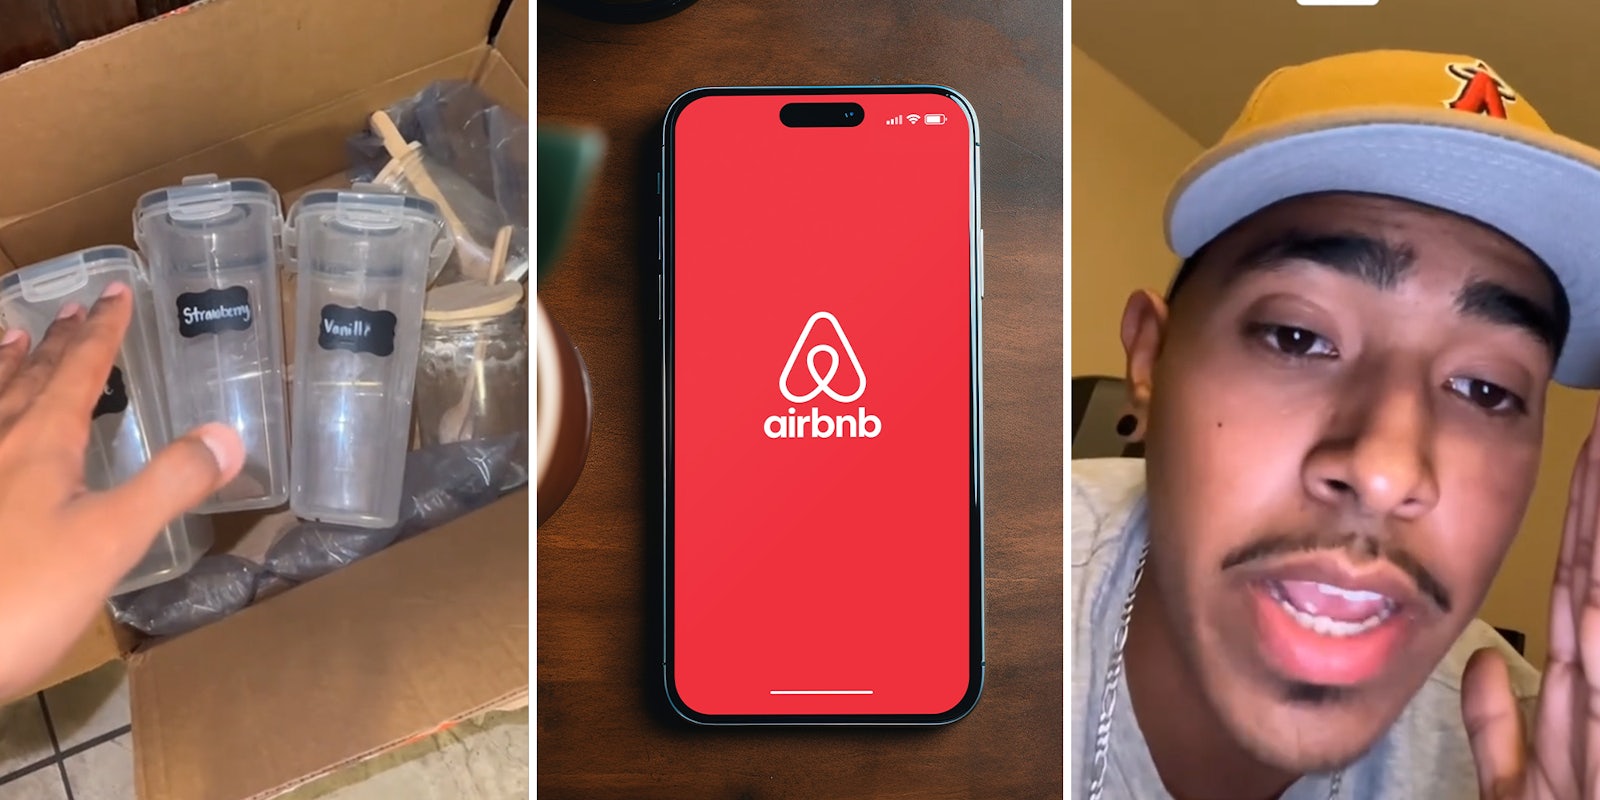 Man says Airbnb charged him $400 after he accidentally took items he thought belonged to him